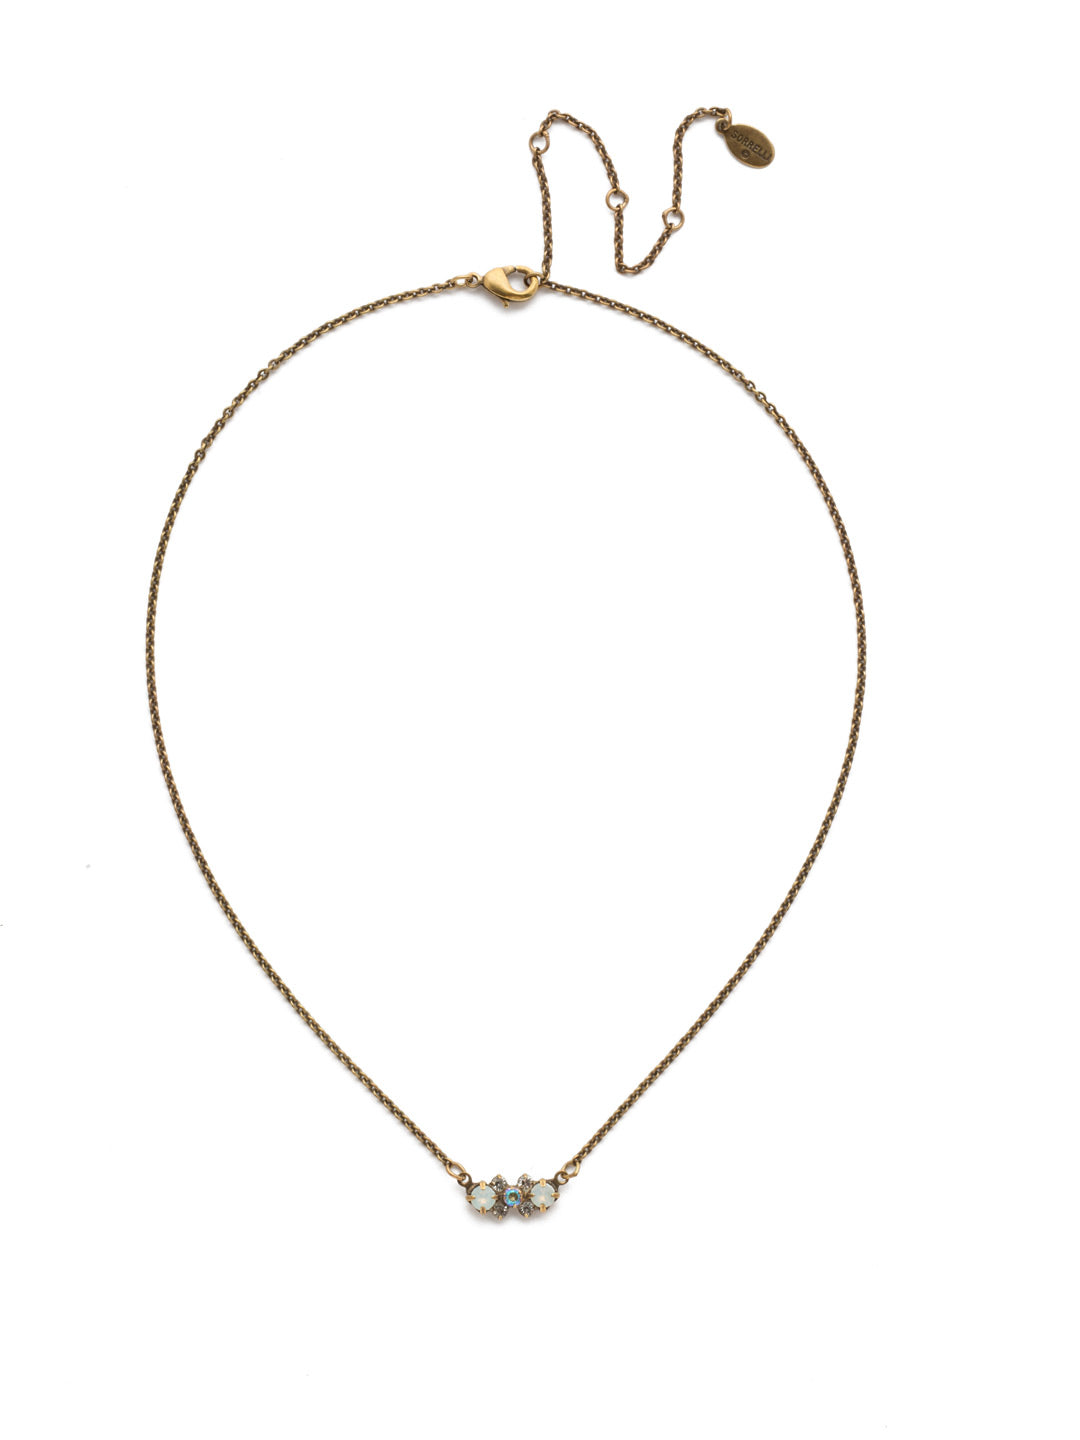 Lush Pendant Necklace - NEK9AGROB - Everyone needs a little sparkle in their life. This perfect pendant does the trick with three center stones accented with just a hint of extra sparkle. From Sorrelli's Rocky Beach collection in our Antique Gold-tone finish.